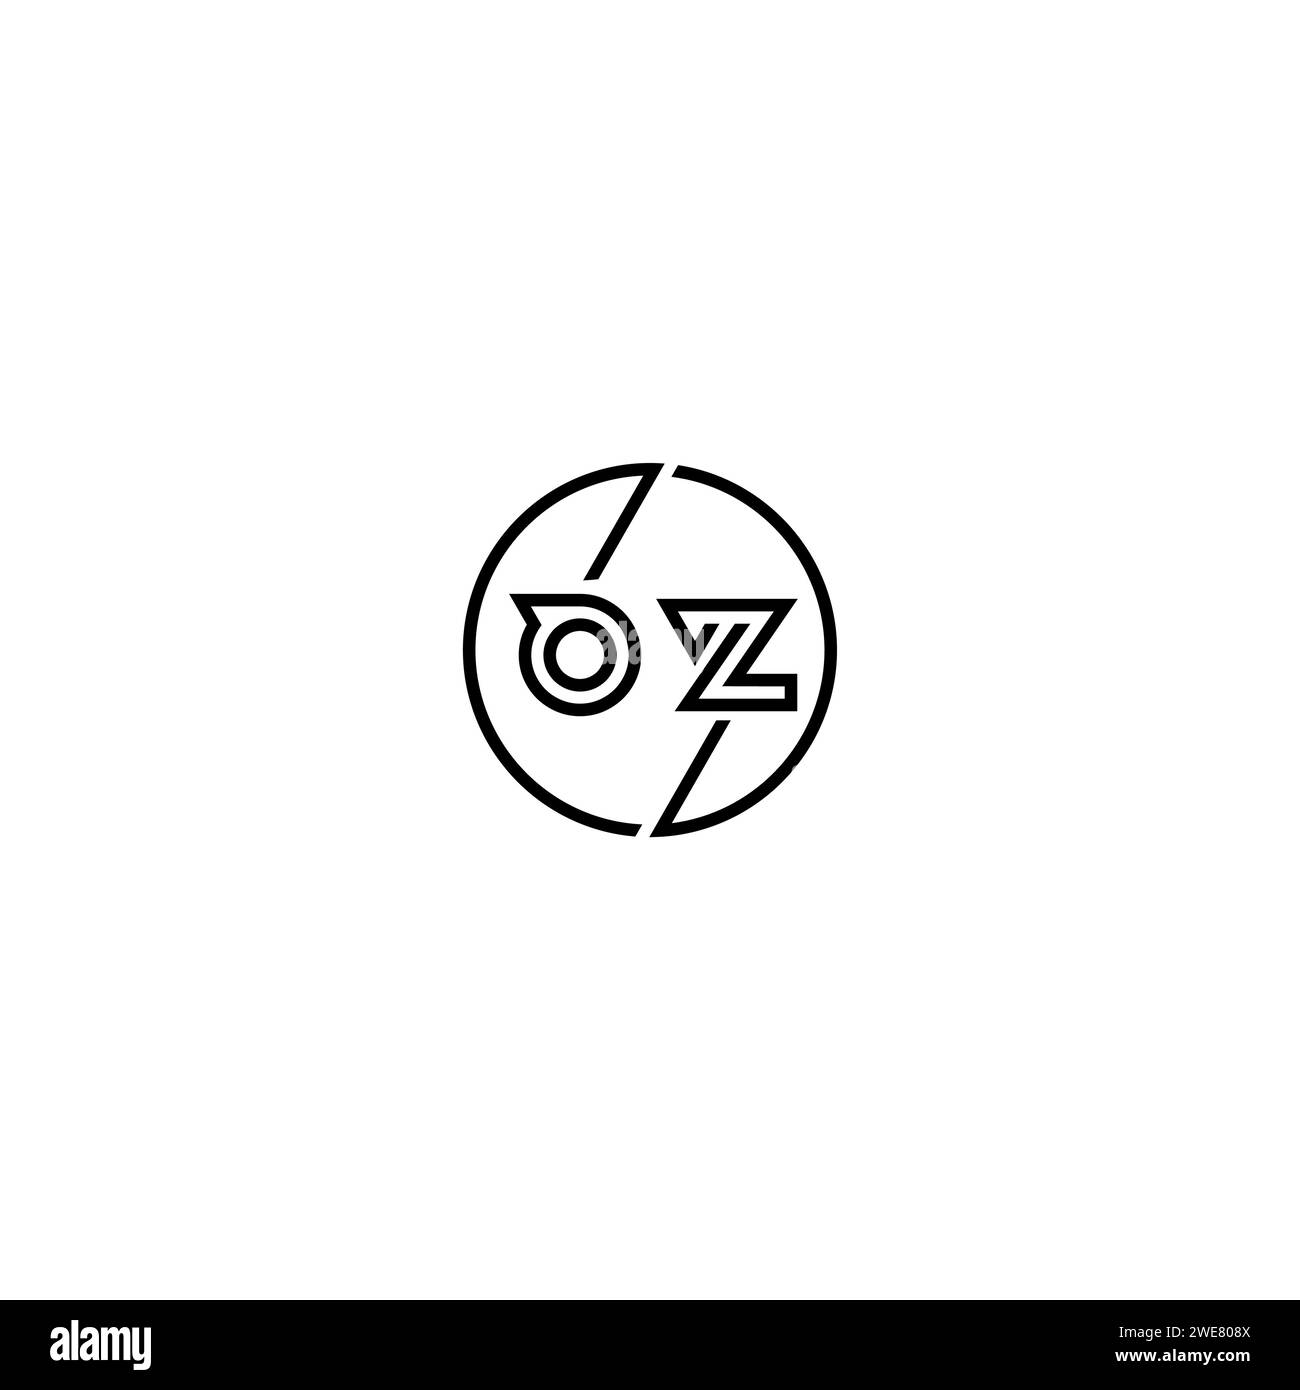 OZ simple outline concept logo and circle of initial design black and white background Stock Vector